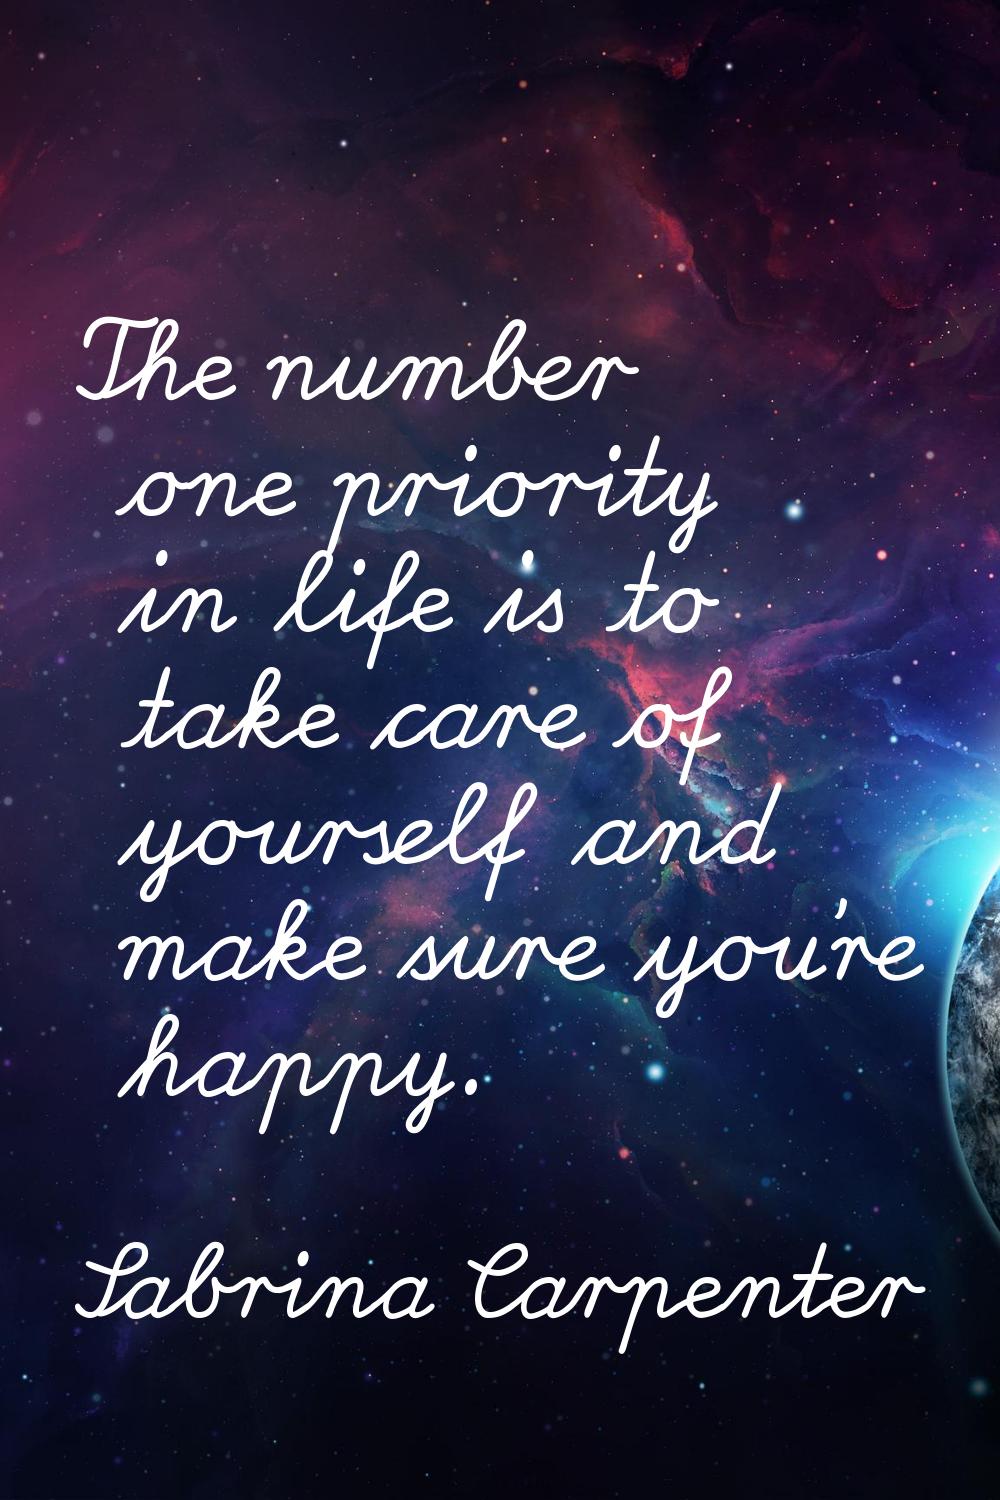 The number one priority in life is to take care of yourself and make sure you're happy.